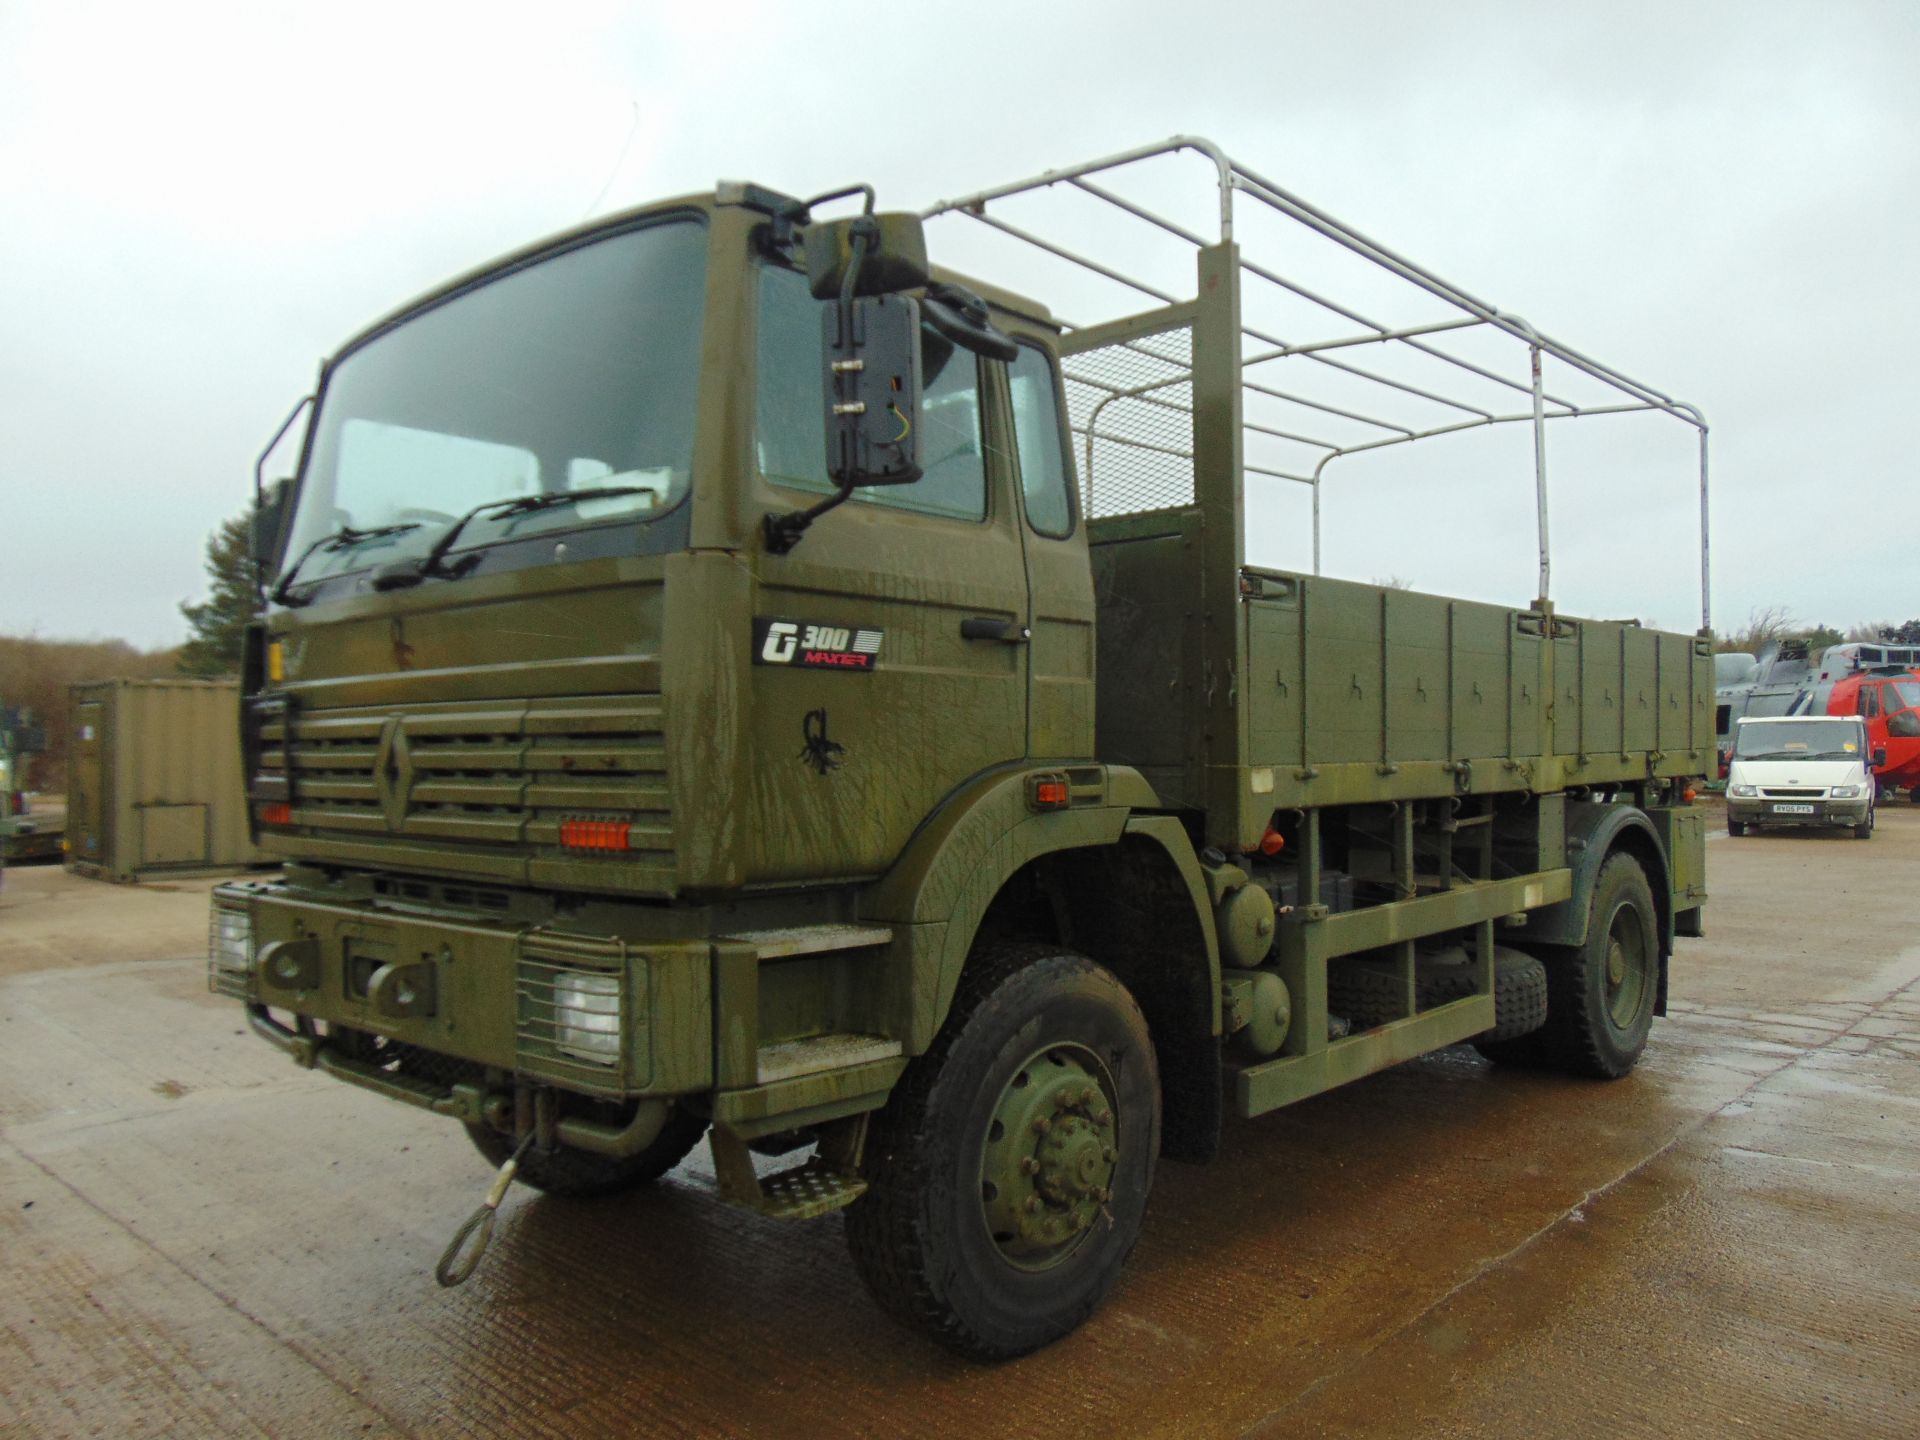 Renault G300 Maxter RHD 4x4 8T Cargo Truck with fitted winch - Image 3 of 16